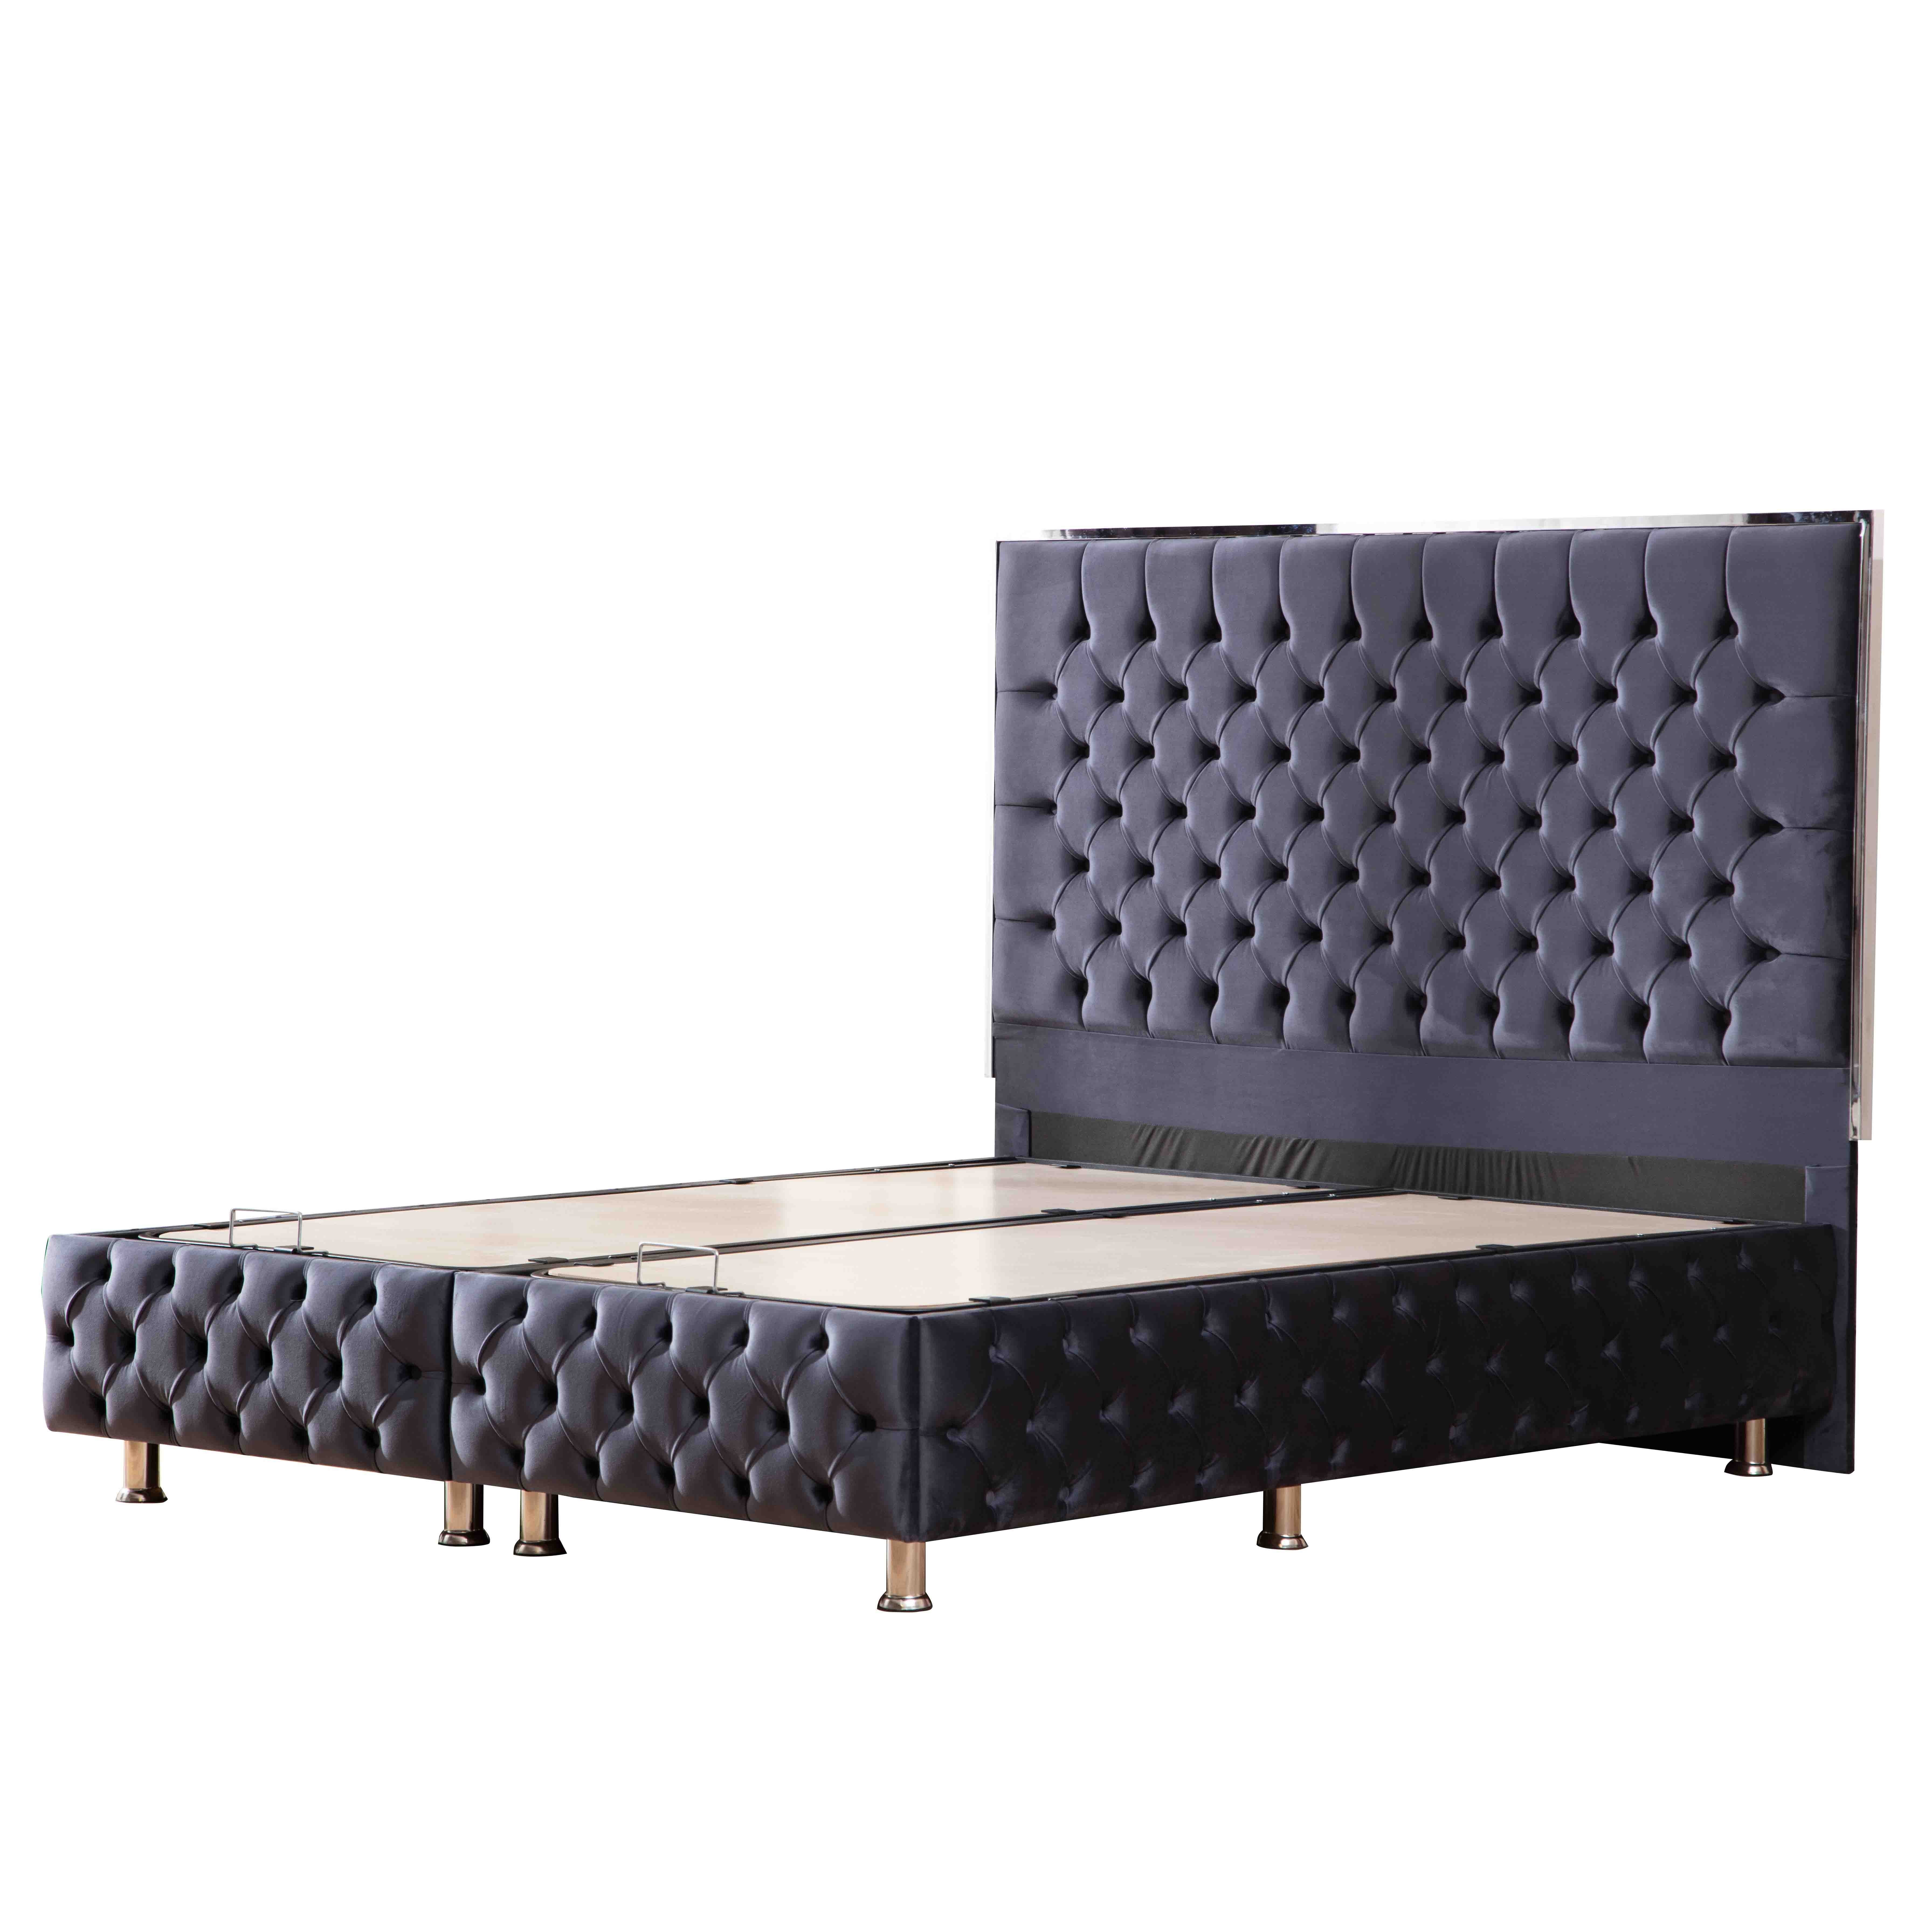 Metalax Bed With Storage 160*200